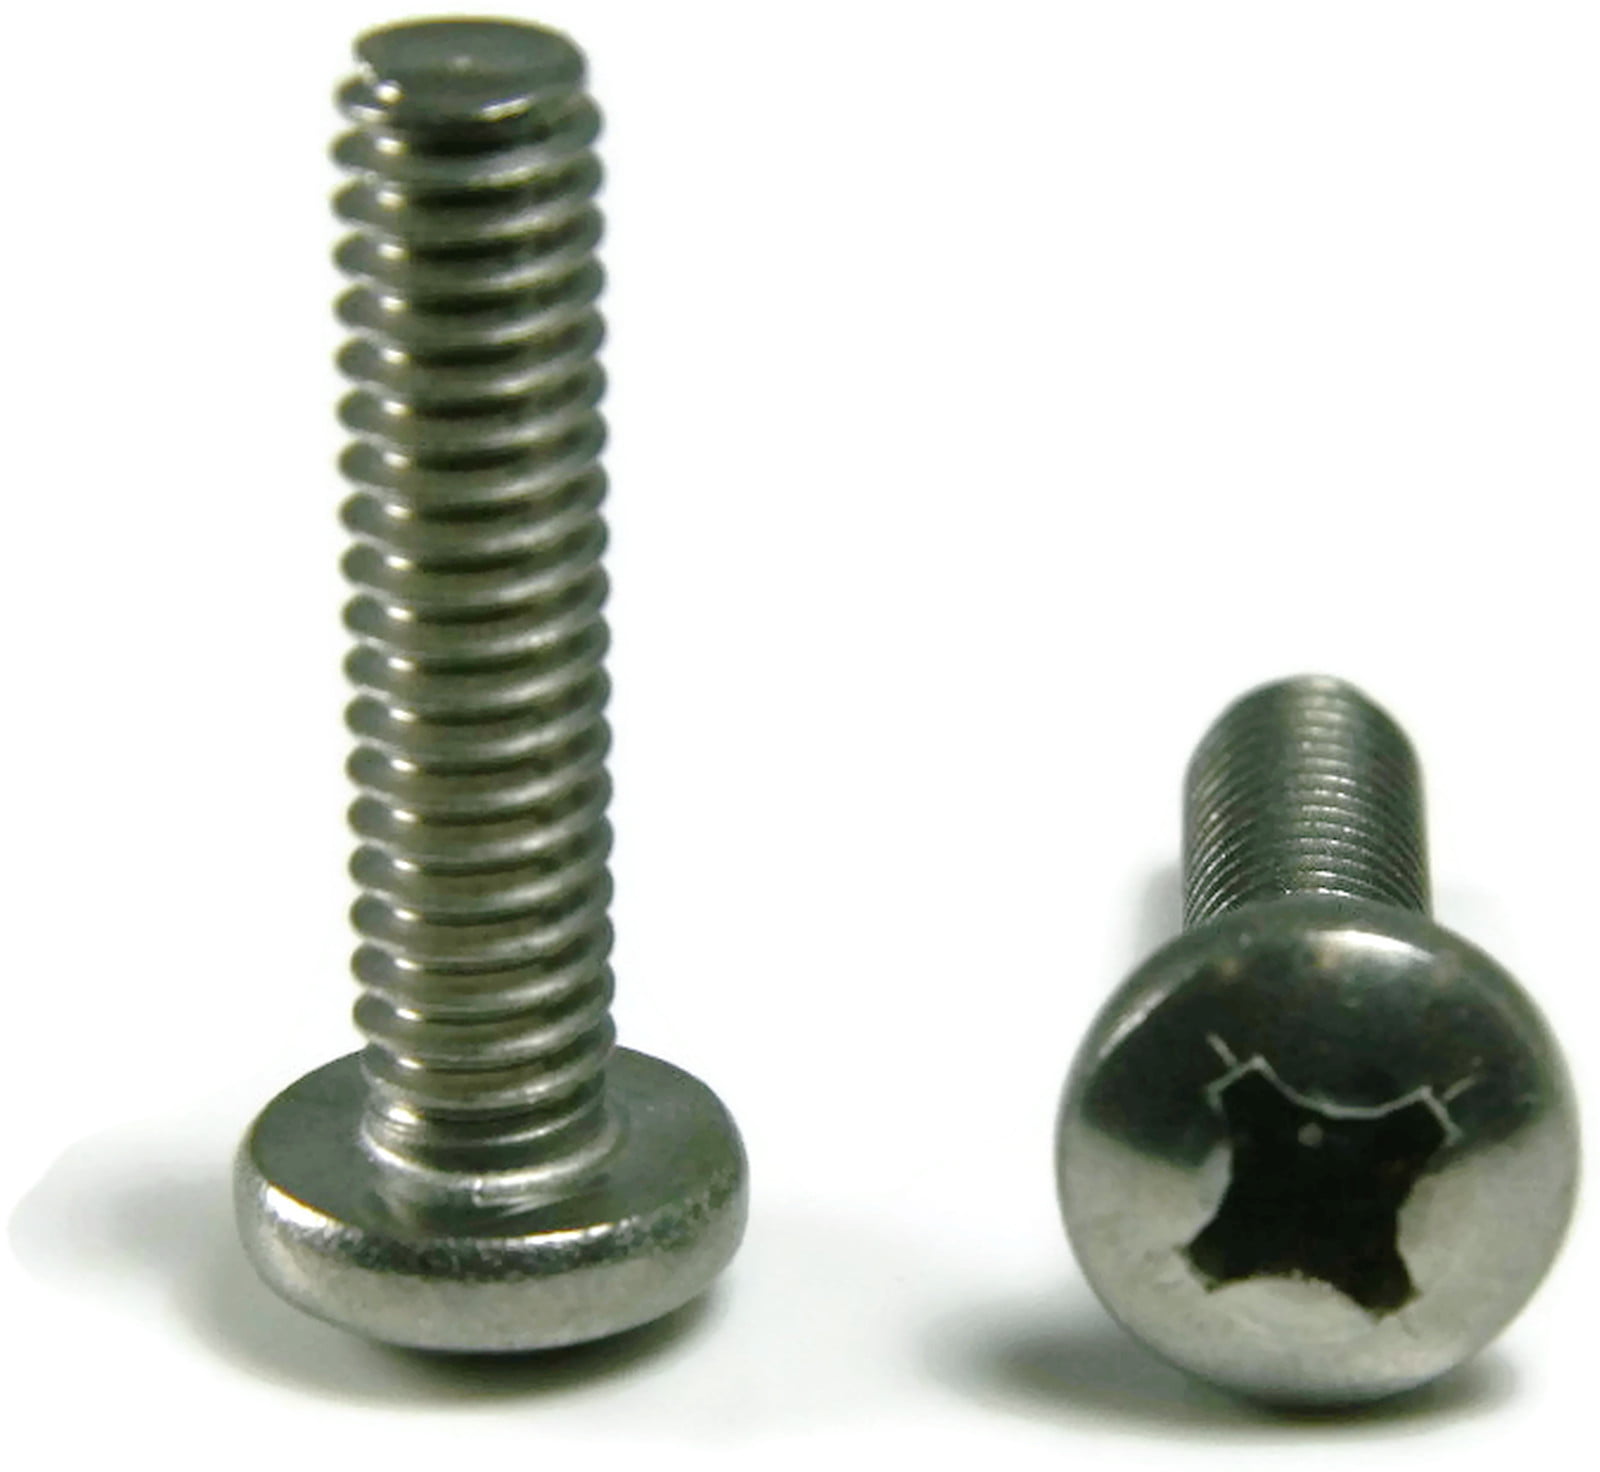 4-40 Machine Screws Pan Head Phillips Drive Stainless Steel Qty 100